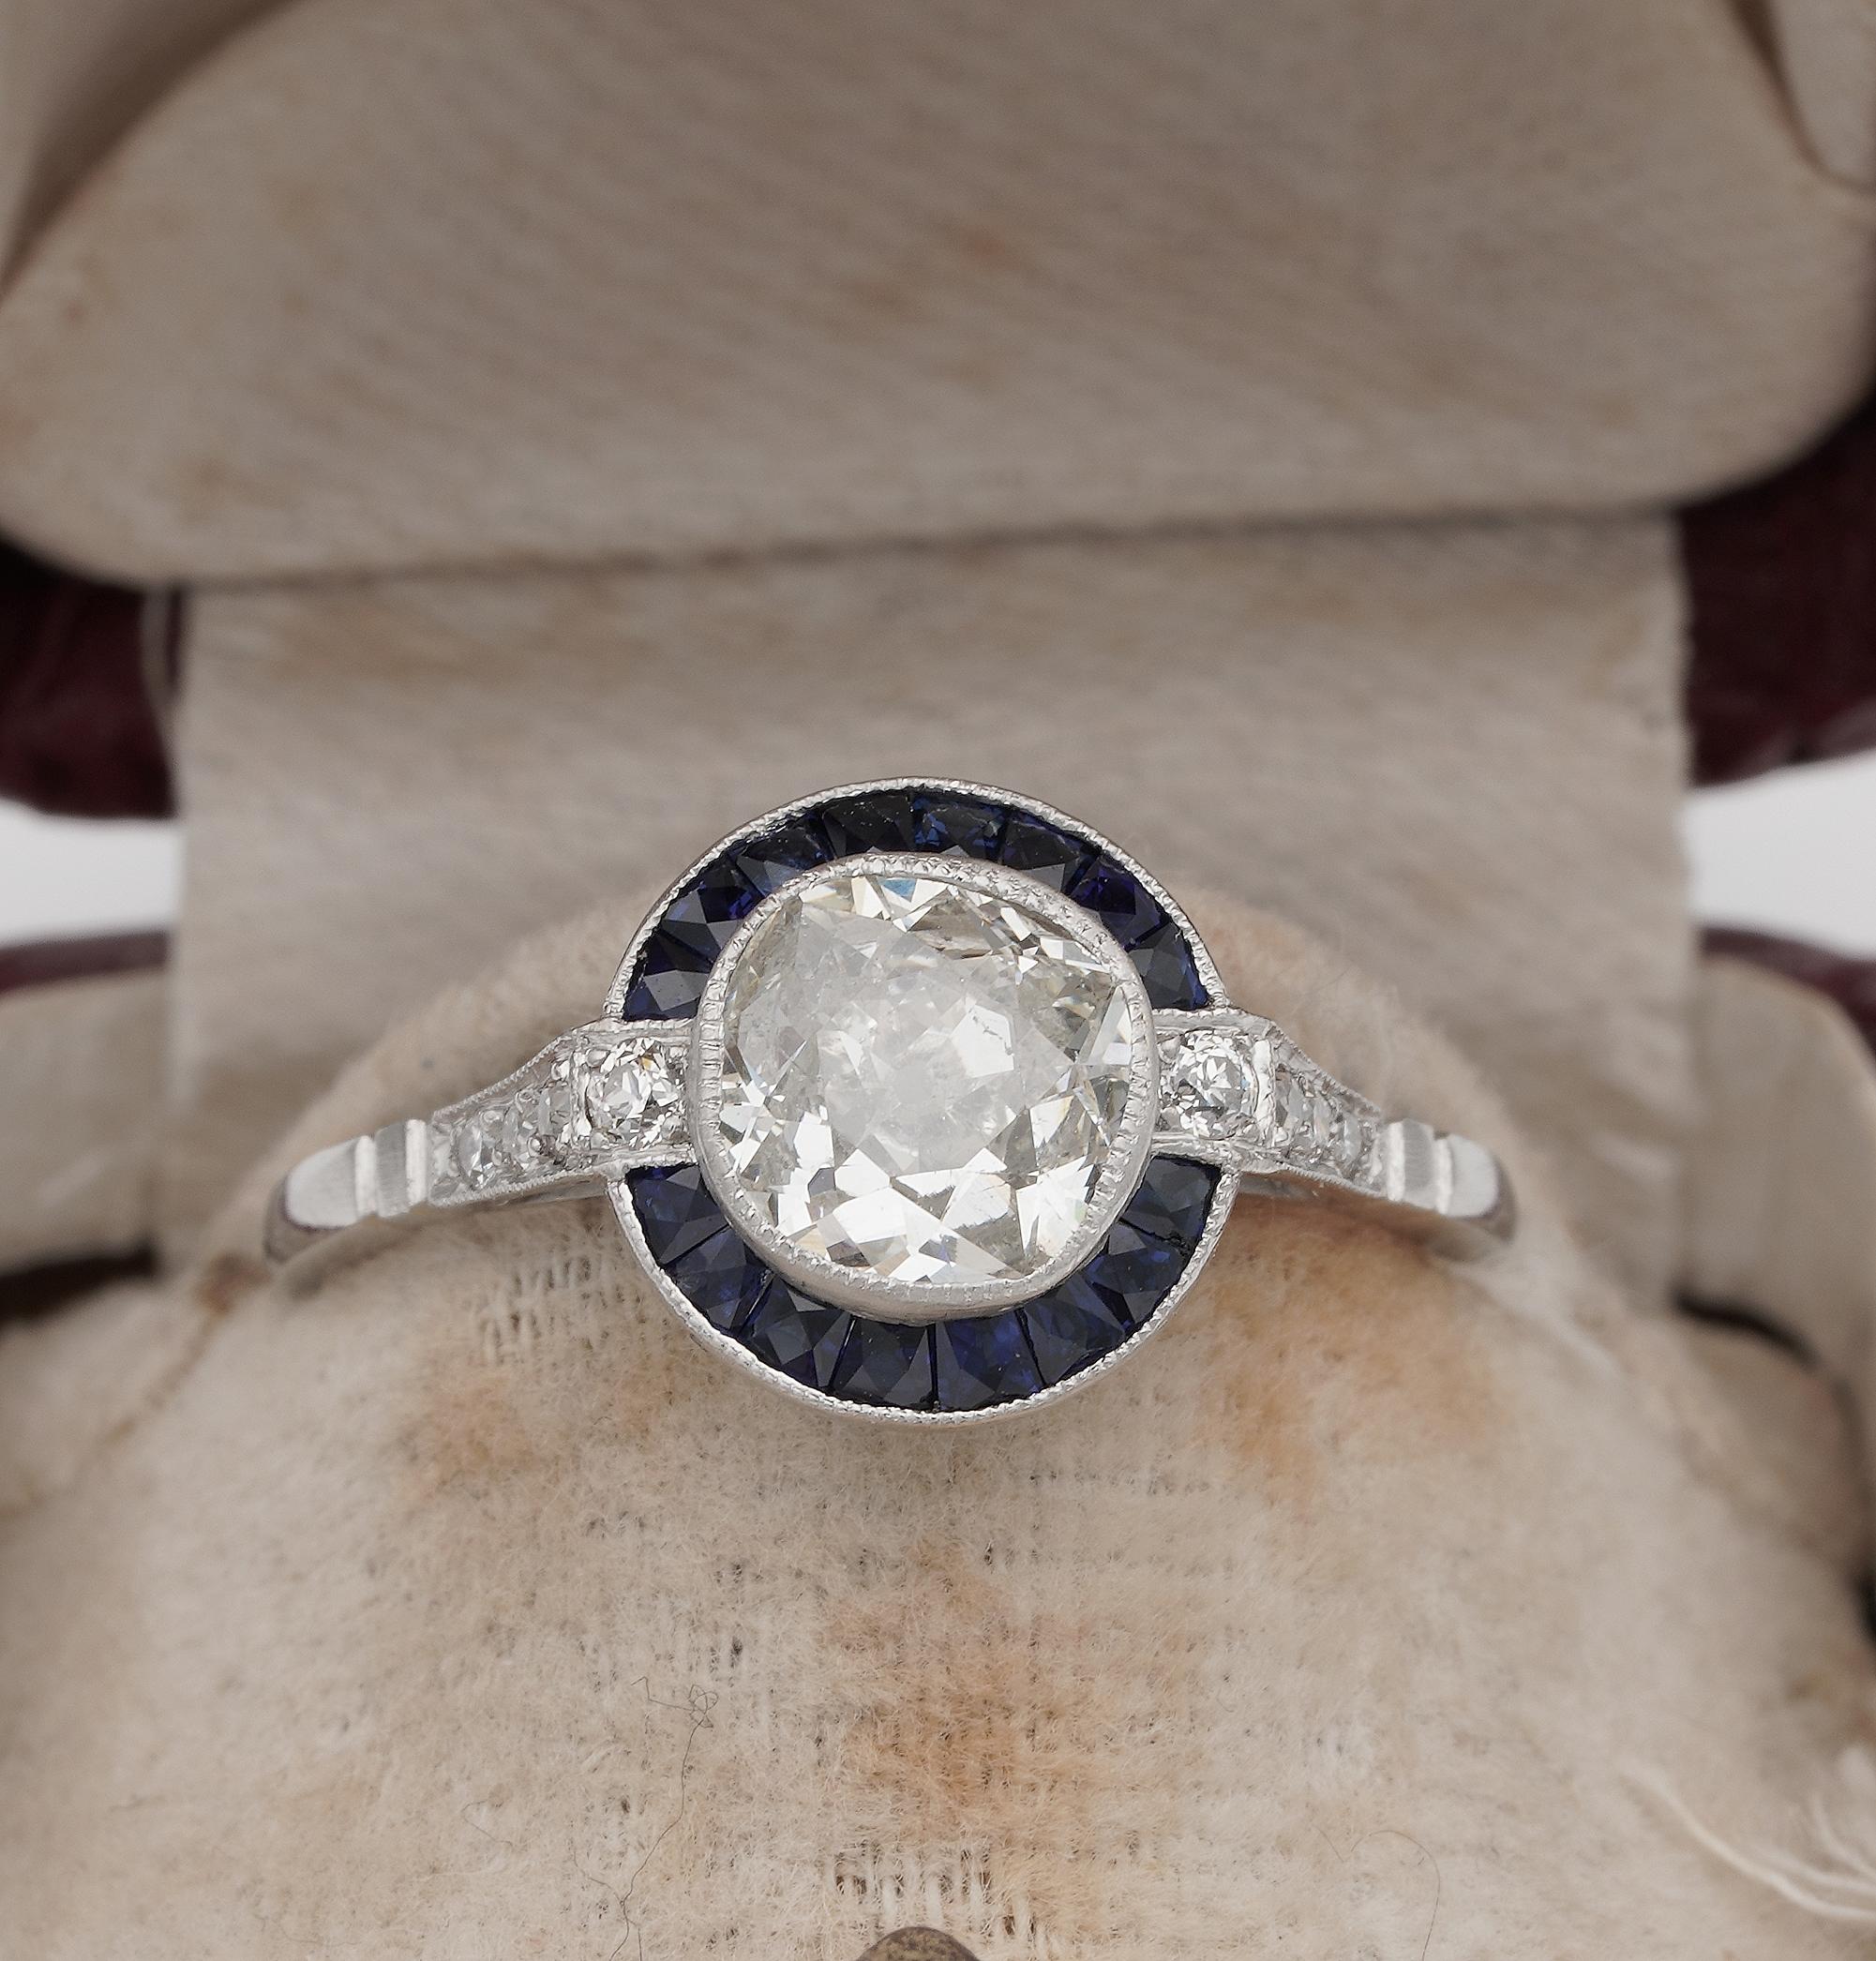 Desirable!
Art Deco style beautiful designed target ring set with old mine cut solitaire Diamond with a halo of square cut natural Sapphires and gorgeous Diamond shoulders
1920 ca, hand crafted of solid Platinum, marked
Centrally set with an old